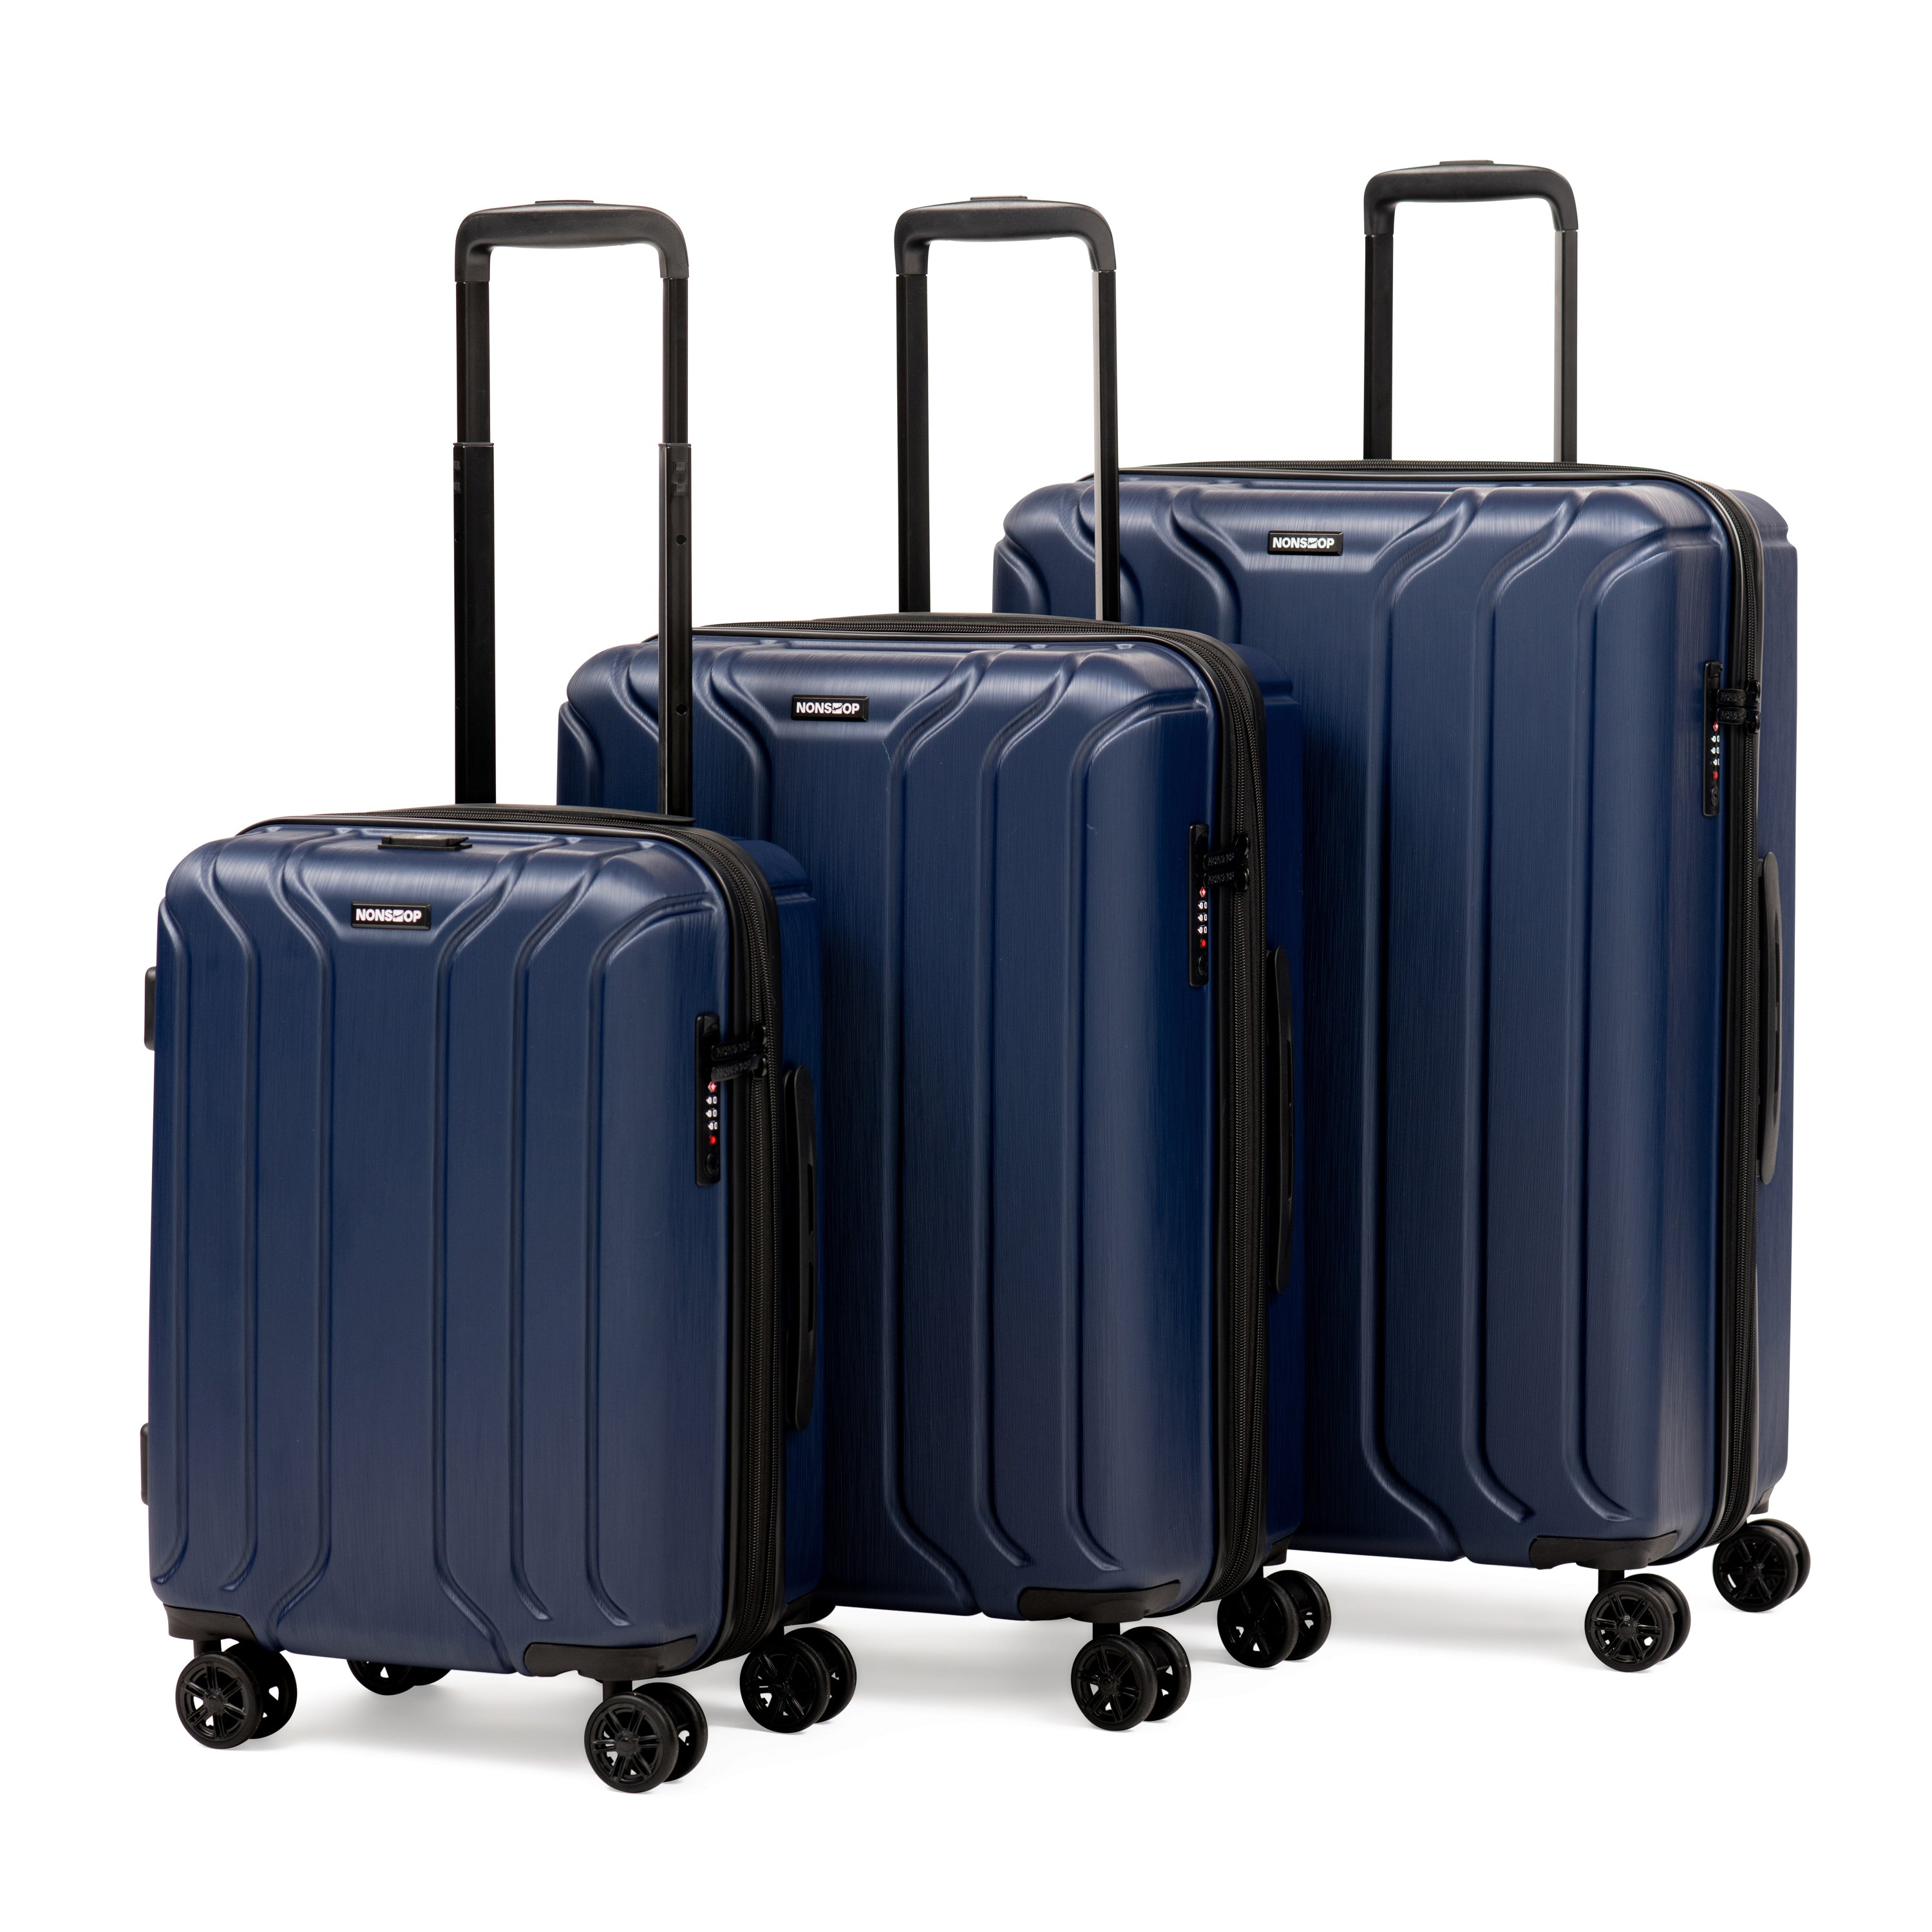 World Traveler Europe 4-Piece Spinner Luggage Set with TSA Lock, with 28  and 24 Upright, 13 Carry-on, and 13 Bag 